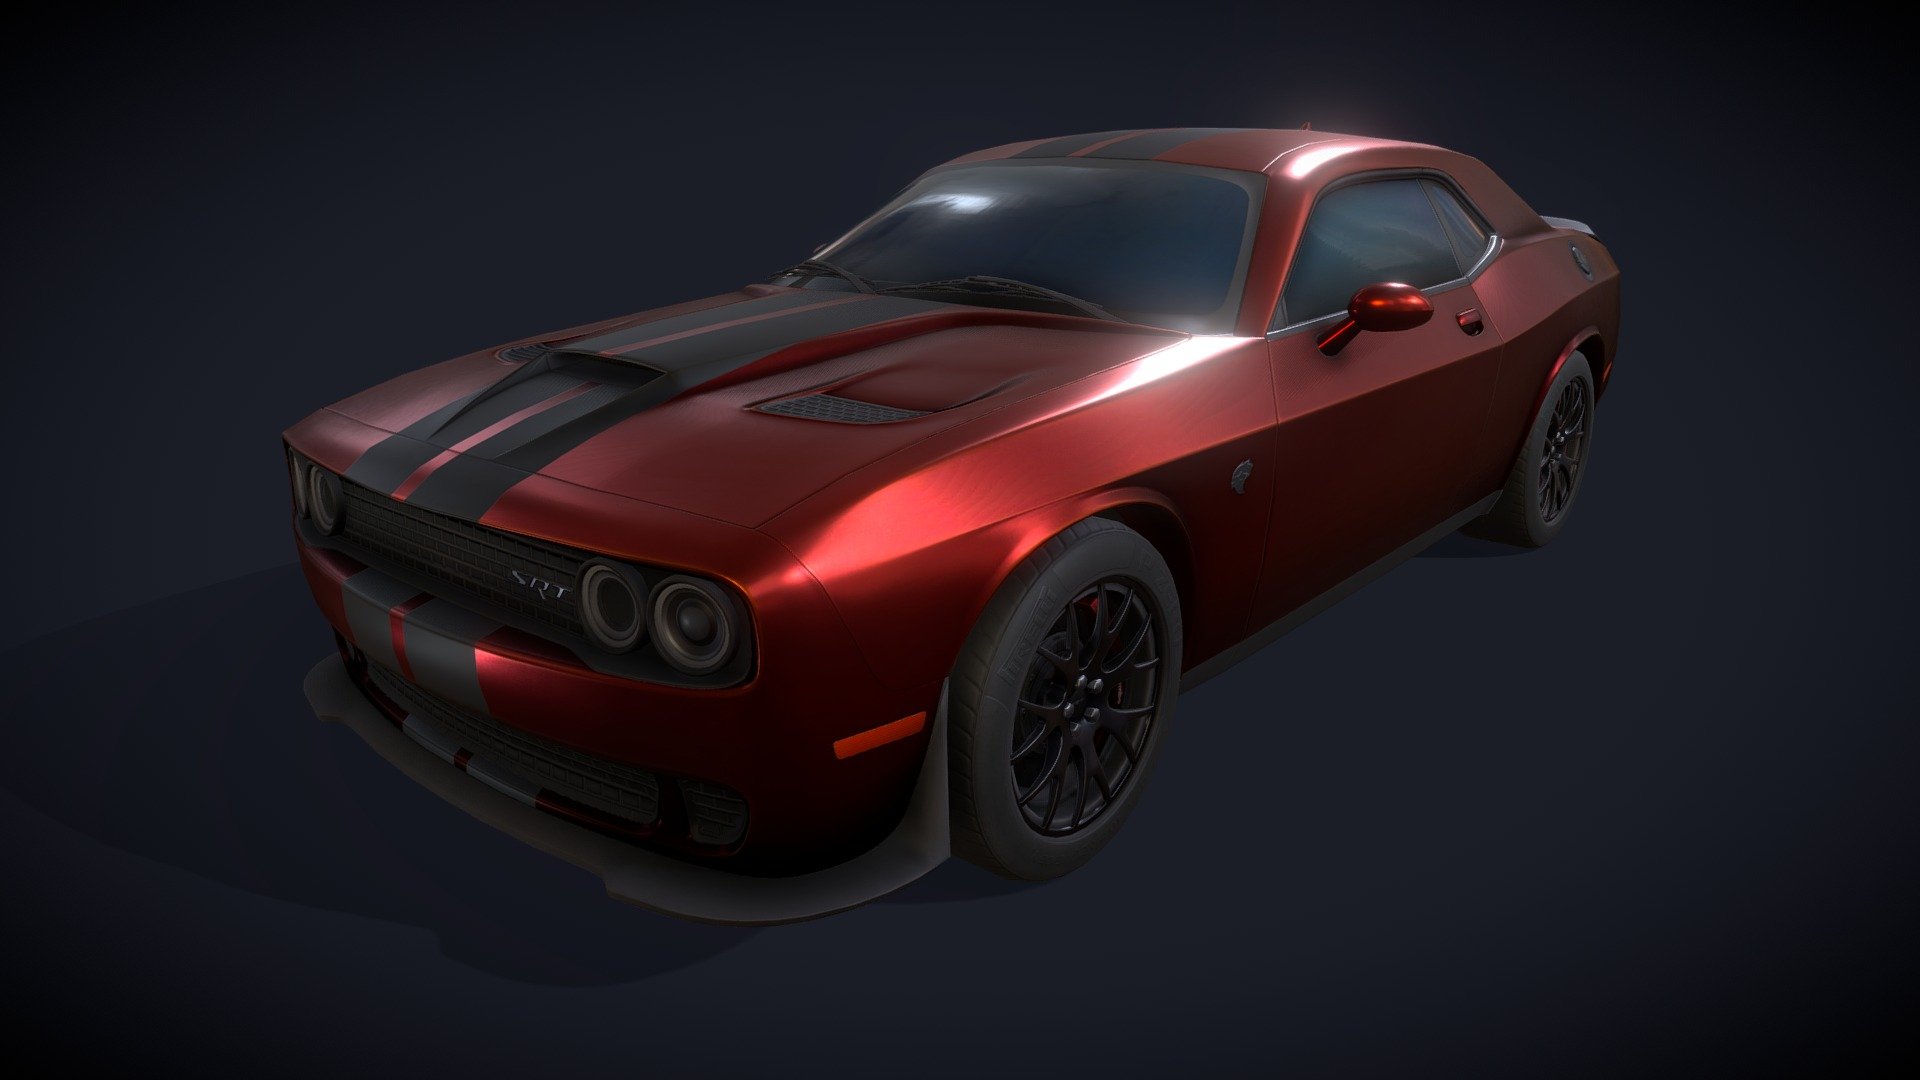 I wanted to challenge myself with my next project, so I decided to try and recreate a car. I've always liked muscle cars so as my subject I chose the Dodge Challenger Hellcat from 2015. It was modelled in Blender/Zbrush and textured in Substance Painter 3d model